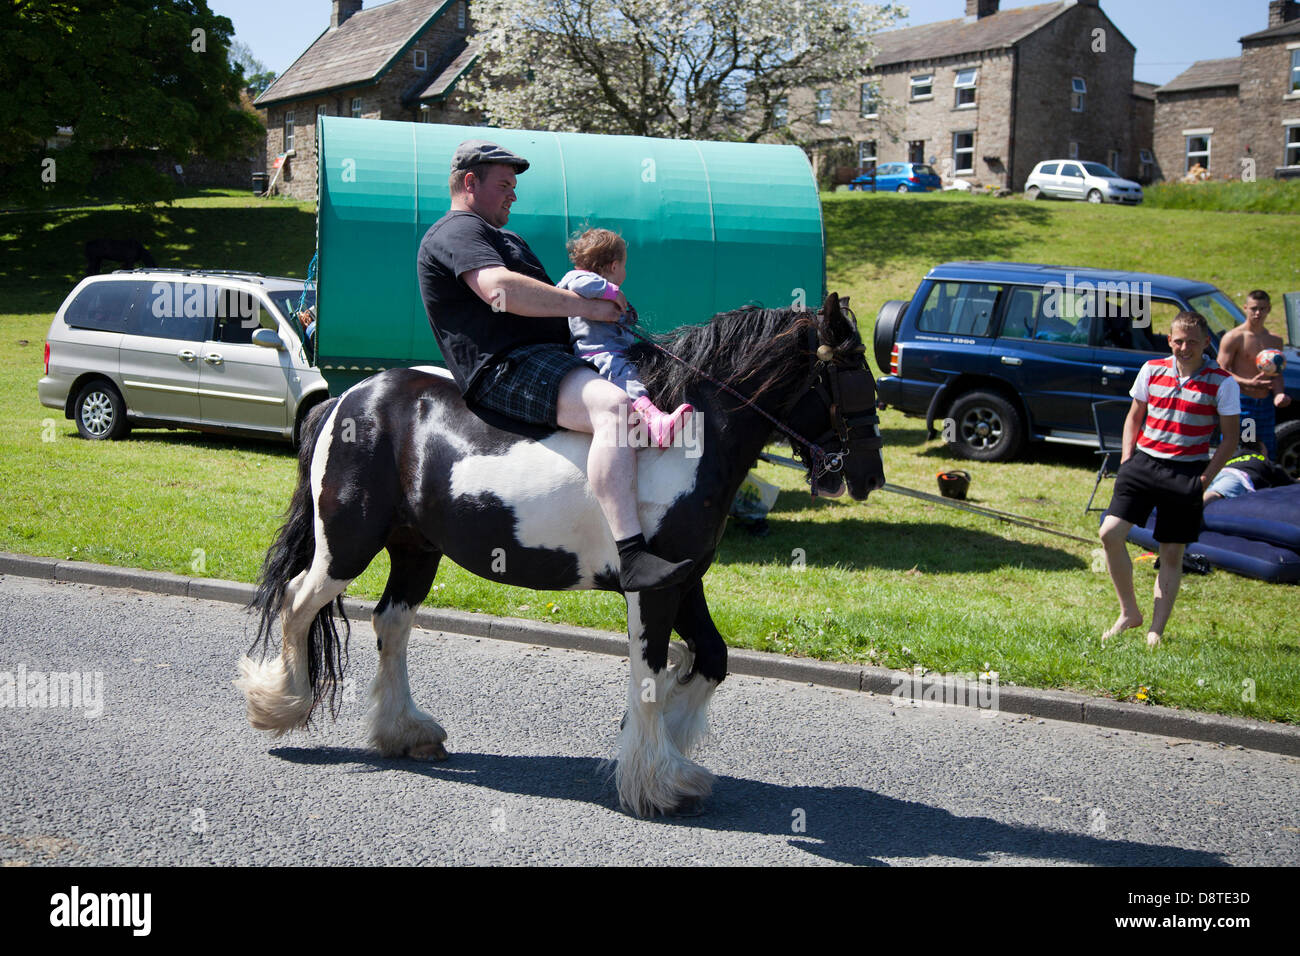 Gypsy travellers in Bainbridge, Richmondshire, North Yorkshire, UK June, 2013. Father and cvhild on horseback as members of the travelling community travel en-route to the Appleby Horse Fair in Cumbria.  The Fair is an annual gathering of Gypsies and Travellers which takes place on the first week in June, and has taken place since the reign of James II, who granted a Royal charter in 1685 allowing a horse fair "near to the River Eden". Stock Photo